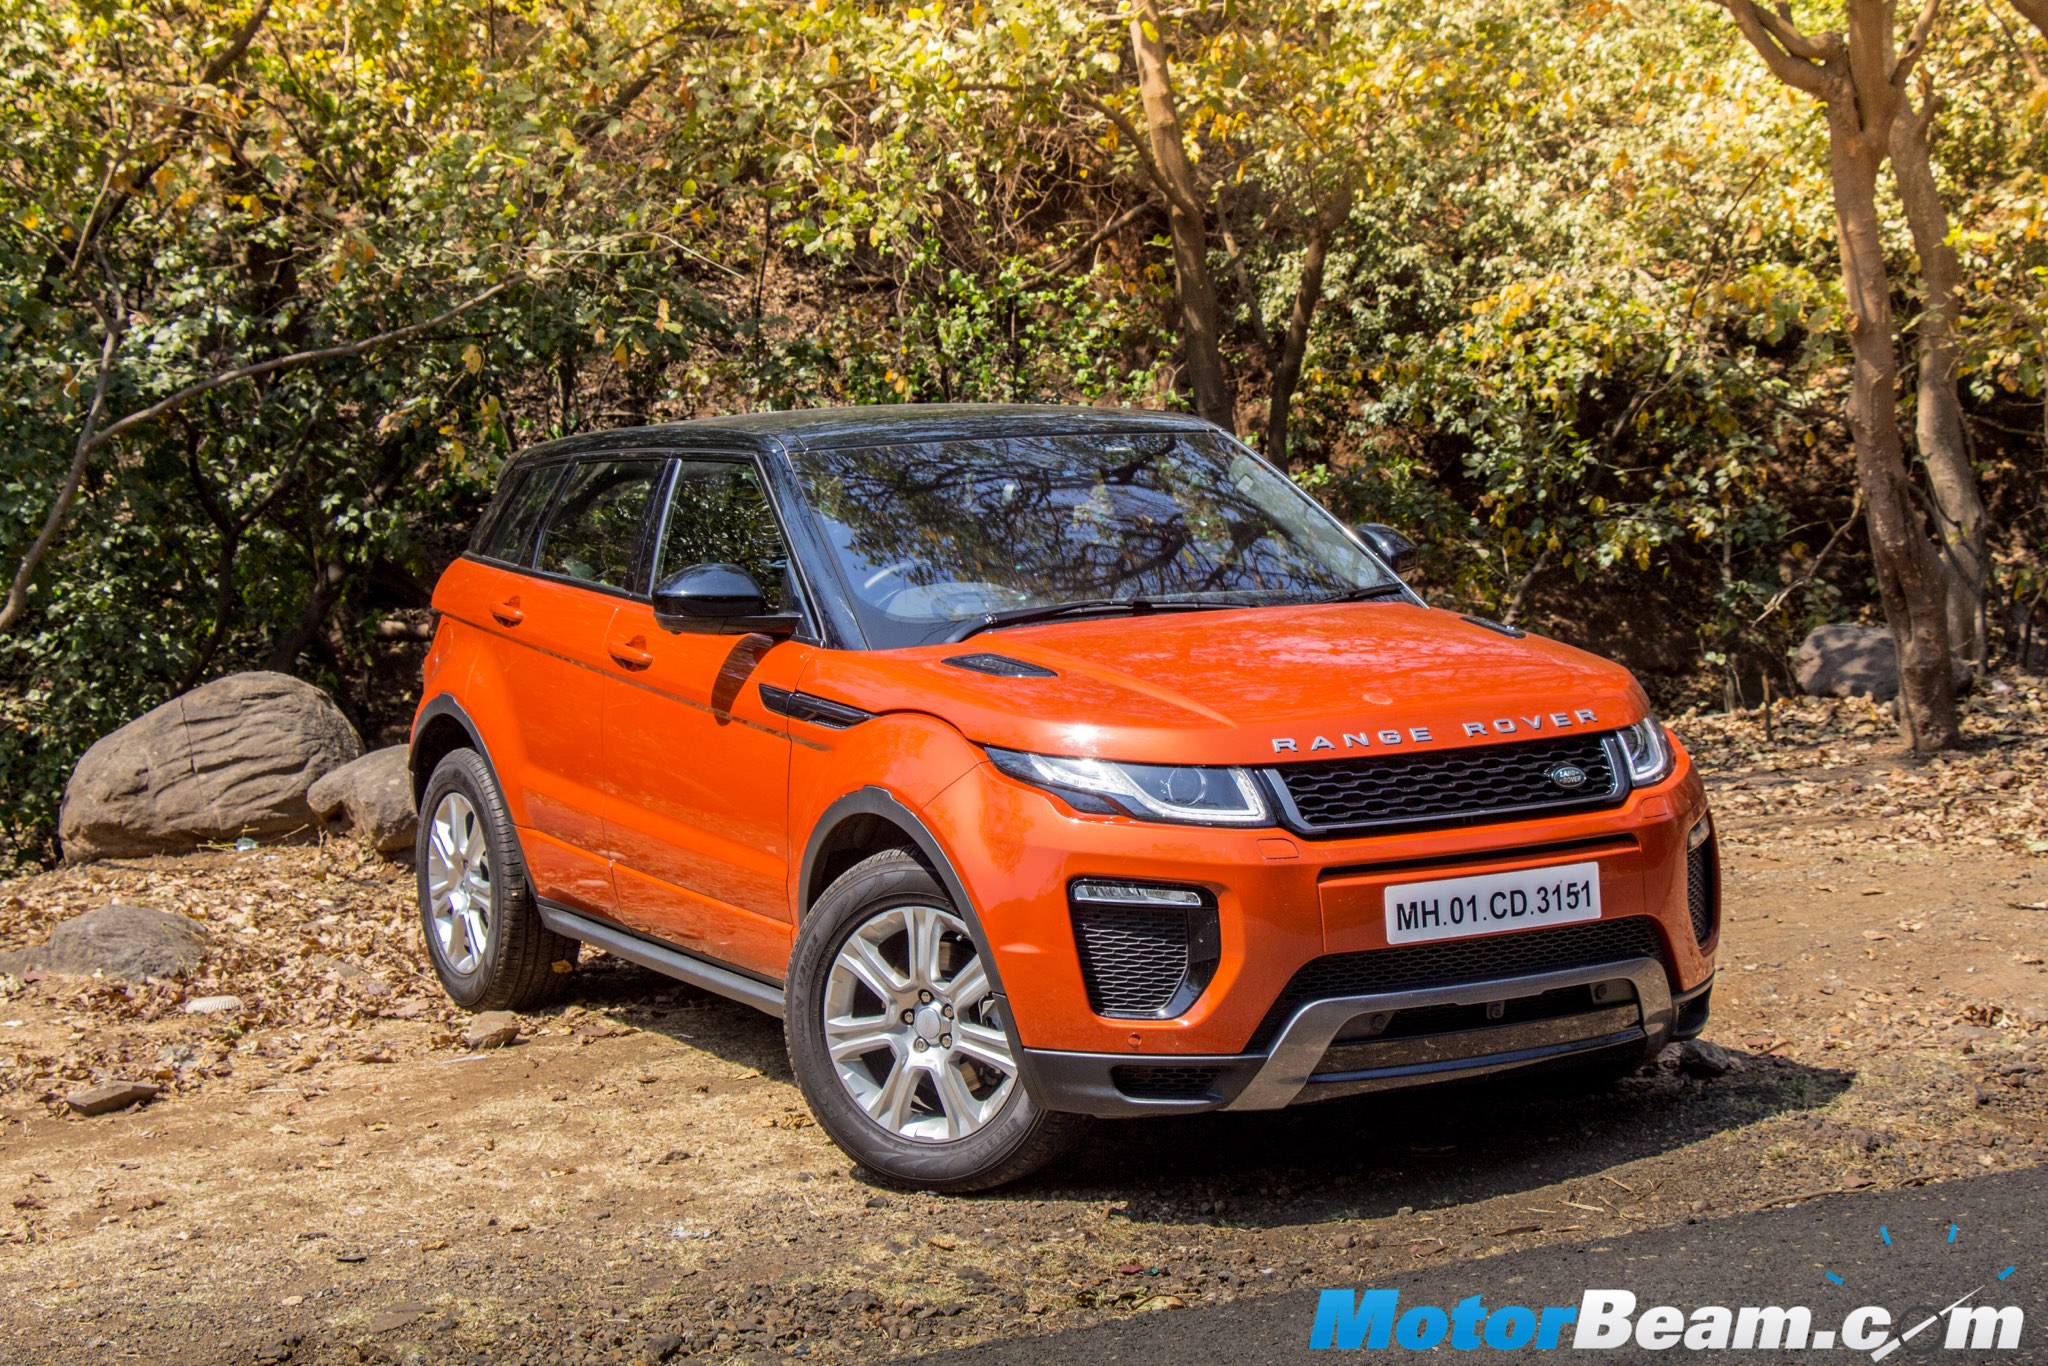 2017 Range Rover Evoque Launched, Priced From Rs. 49.10 Lakhs